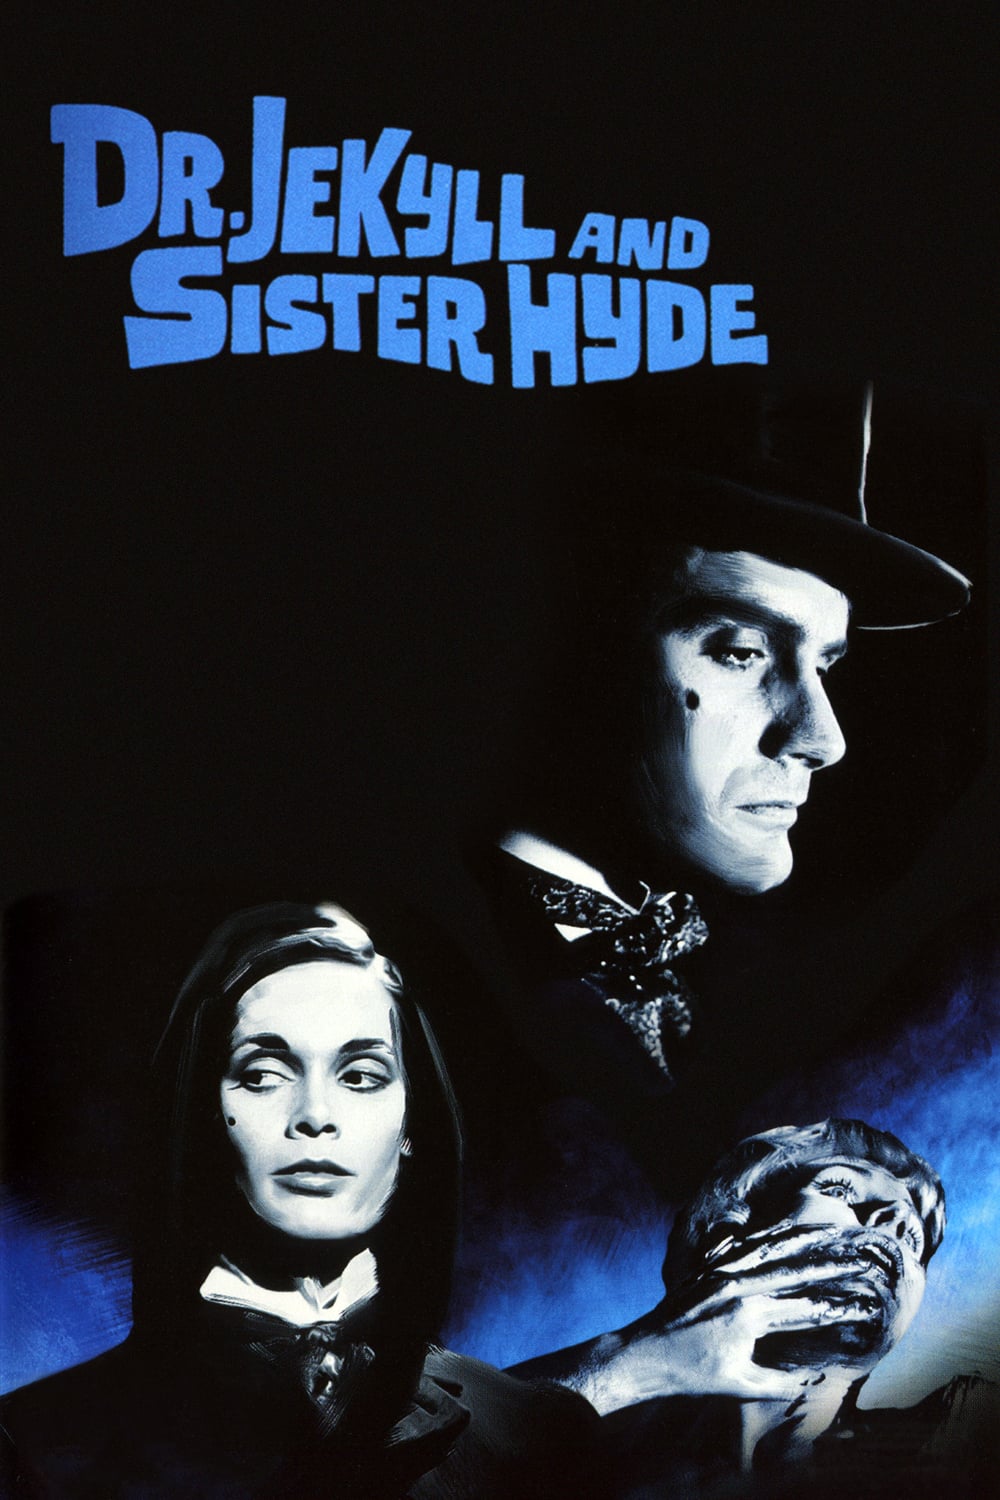 Caratula de DR JEKYLL AND SISTER HYDE (Doctor jekyll y la senora hyde / Dr. Jekyll y su hermana Hyde) 